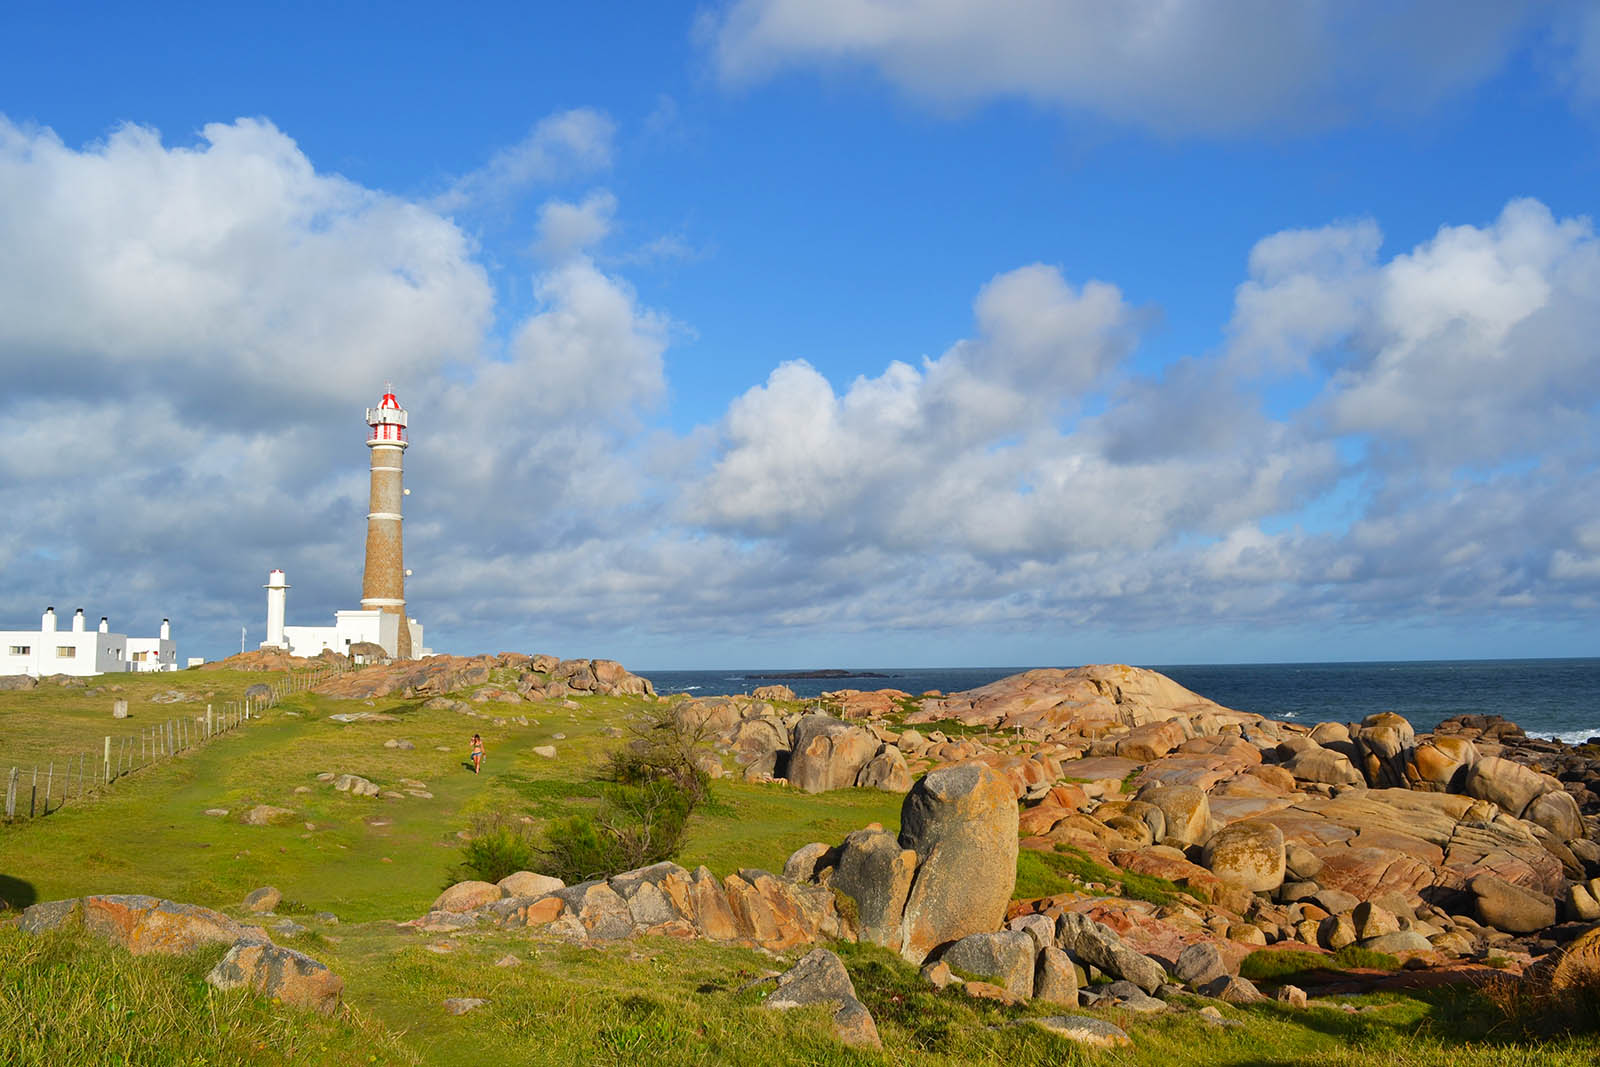 The lighthouse of Cabo Polonio. Credit: Niki Biller